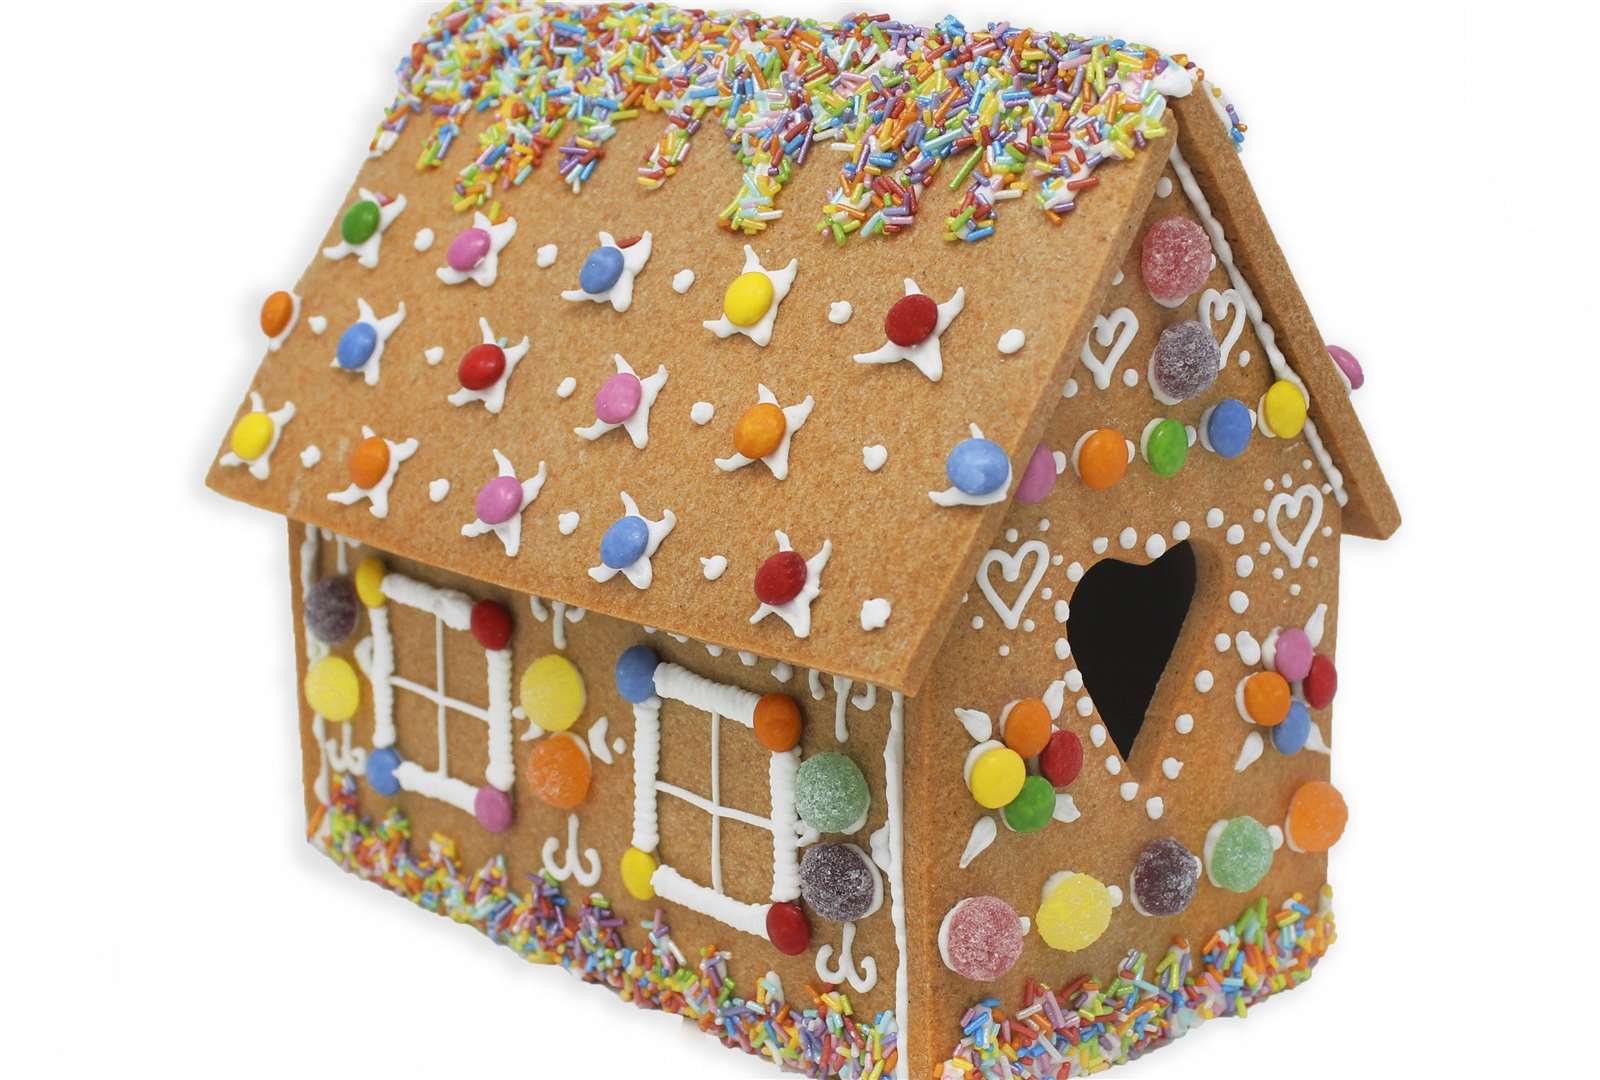 Supermarkets sell ready-made gingerbread houses at this time of year